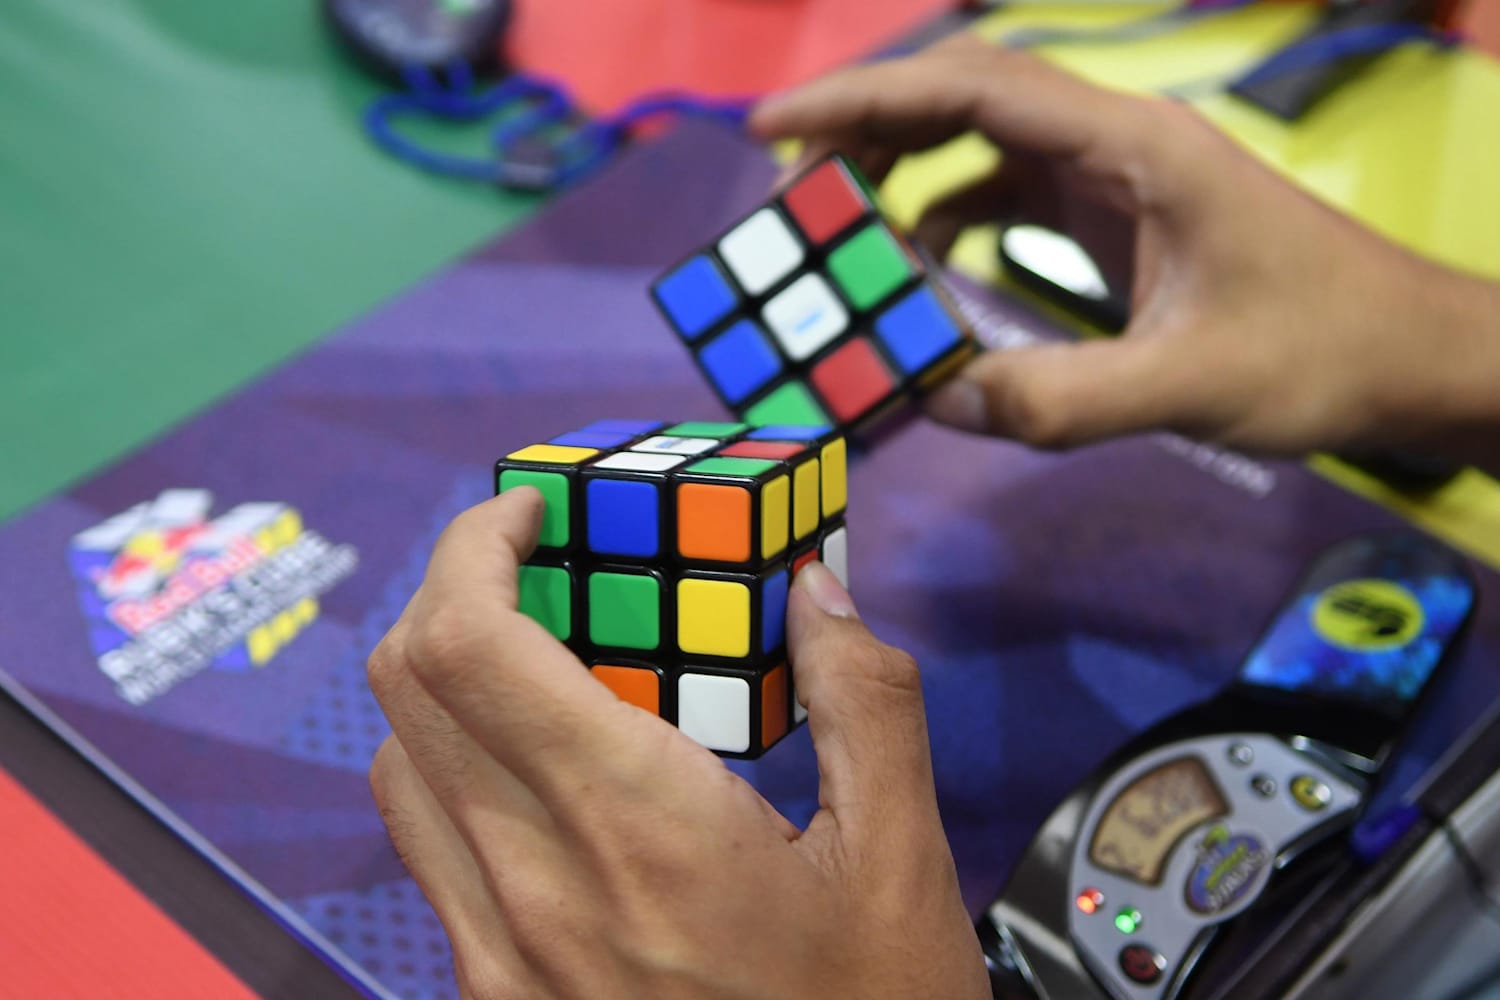 India qualifiers of Rubik's Cube World Championship